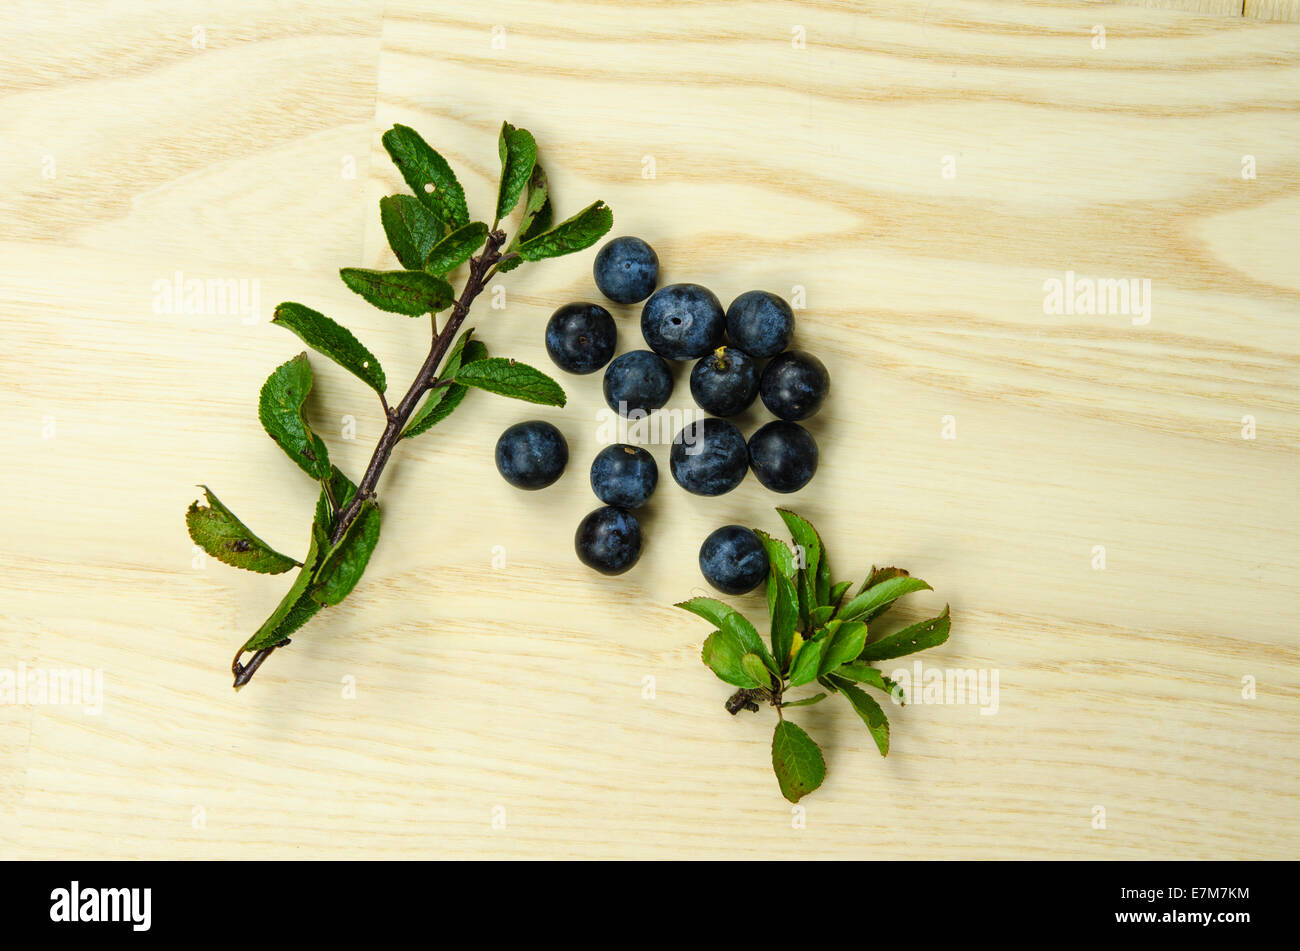 Sloe or blackthorn berries with green leaves at a bright wooden surface Stock Photo